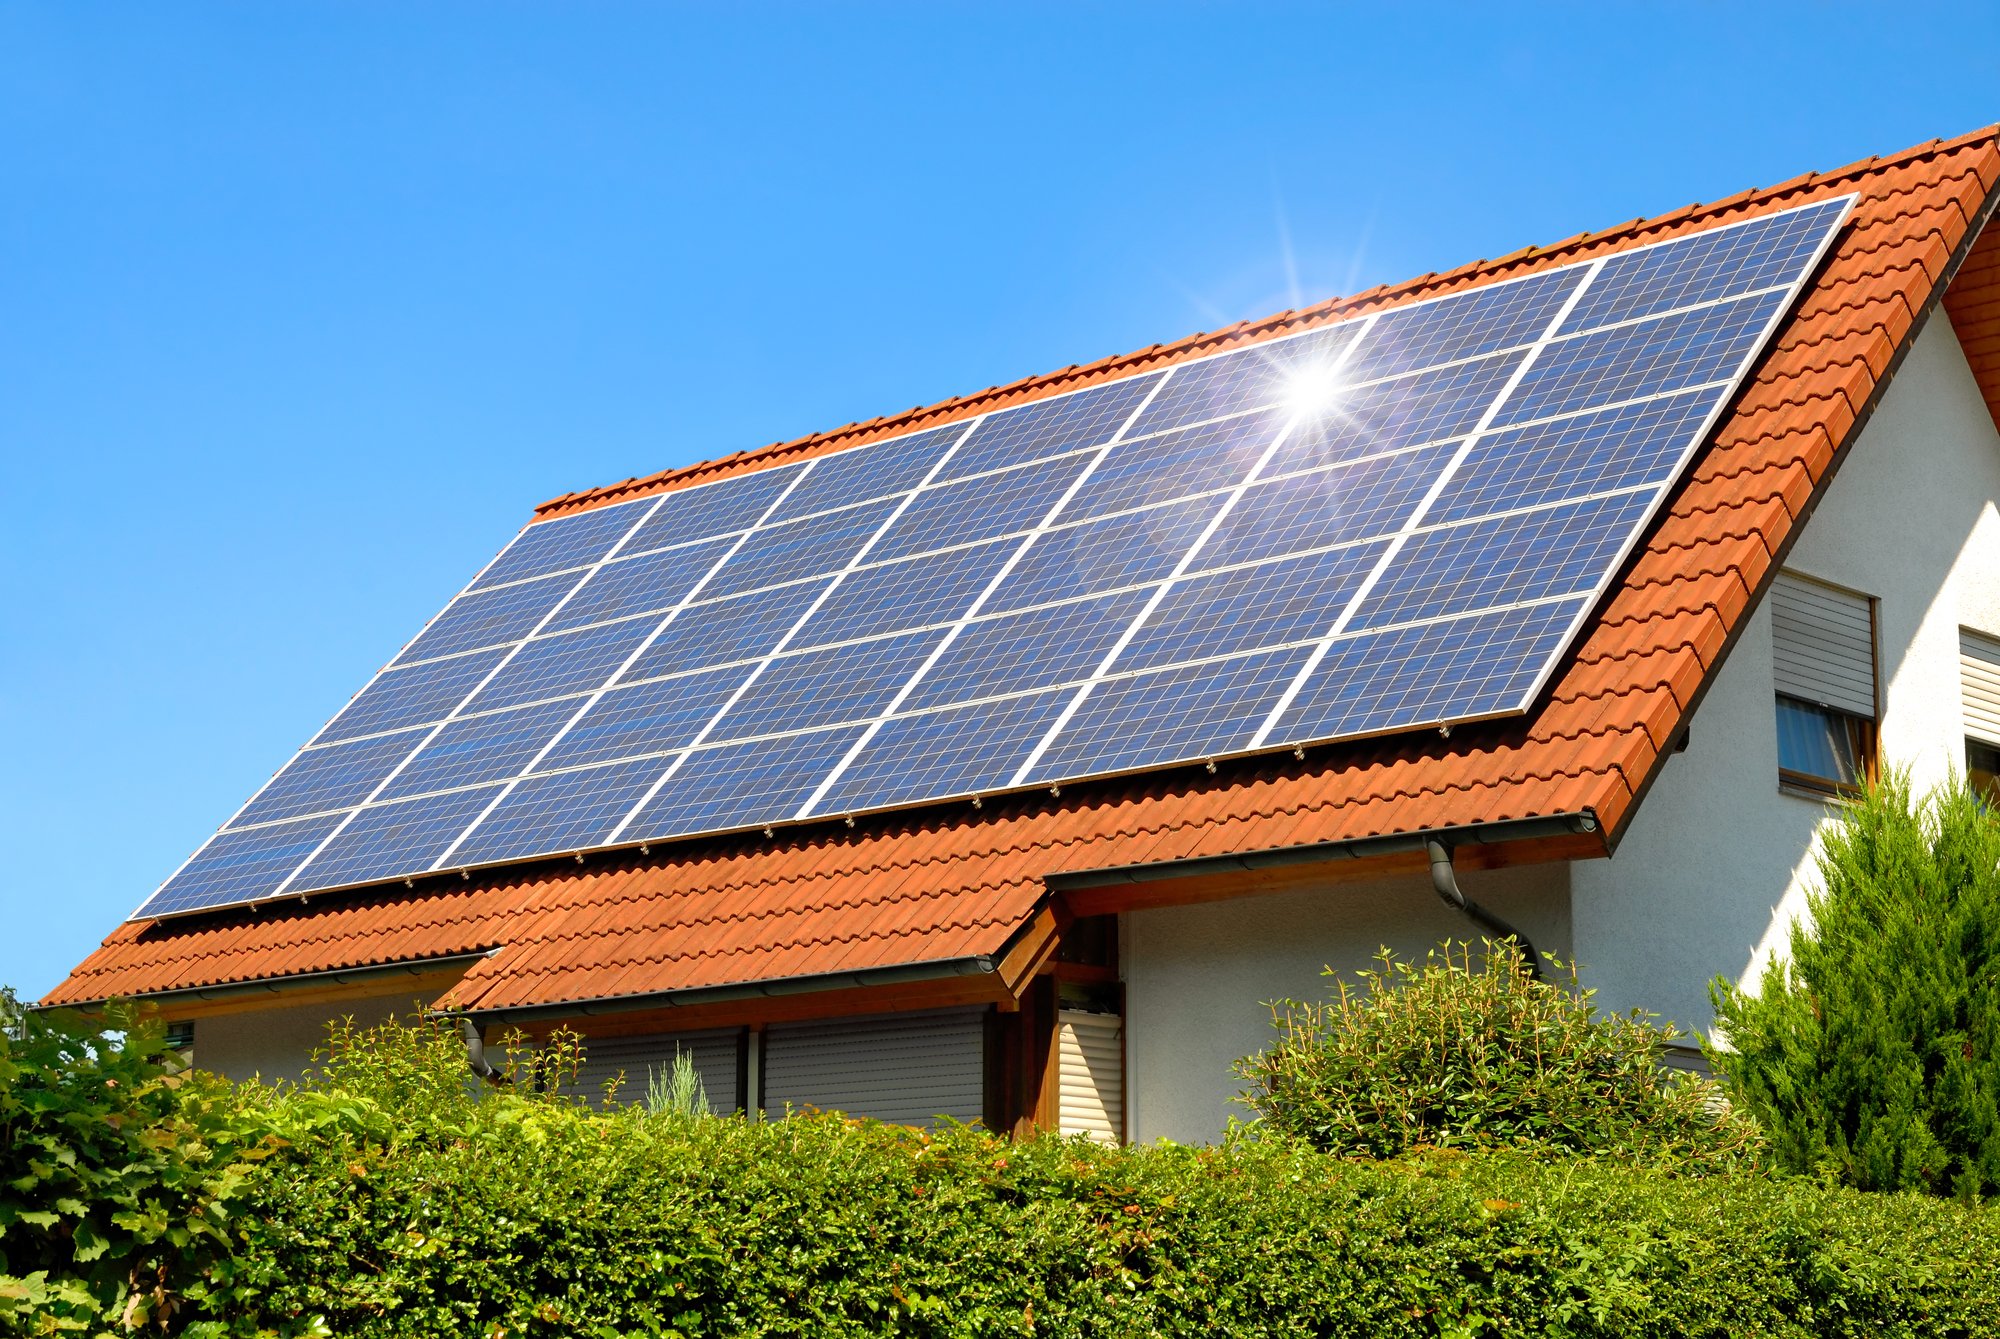 sunrun-solar-robocalls-class-action-settlement-click-here-to-know-more